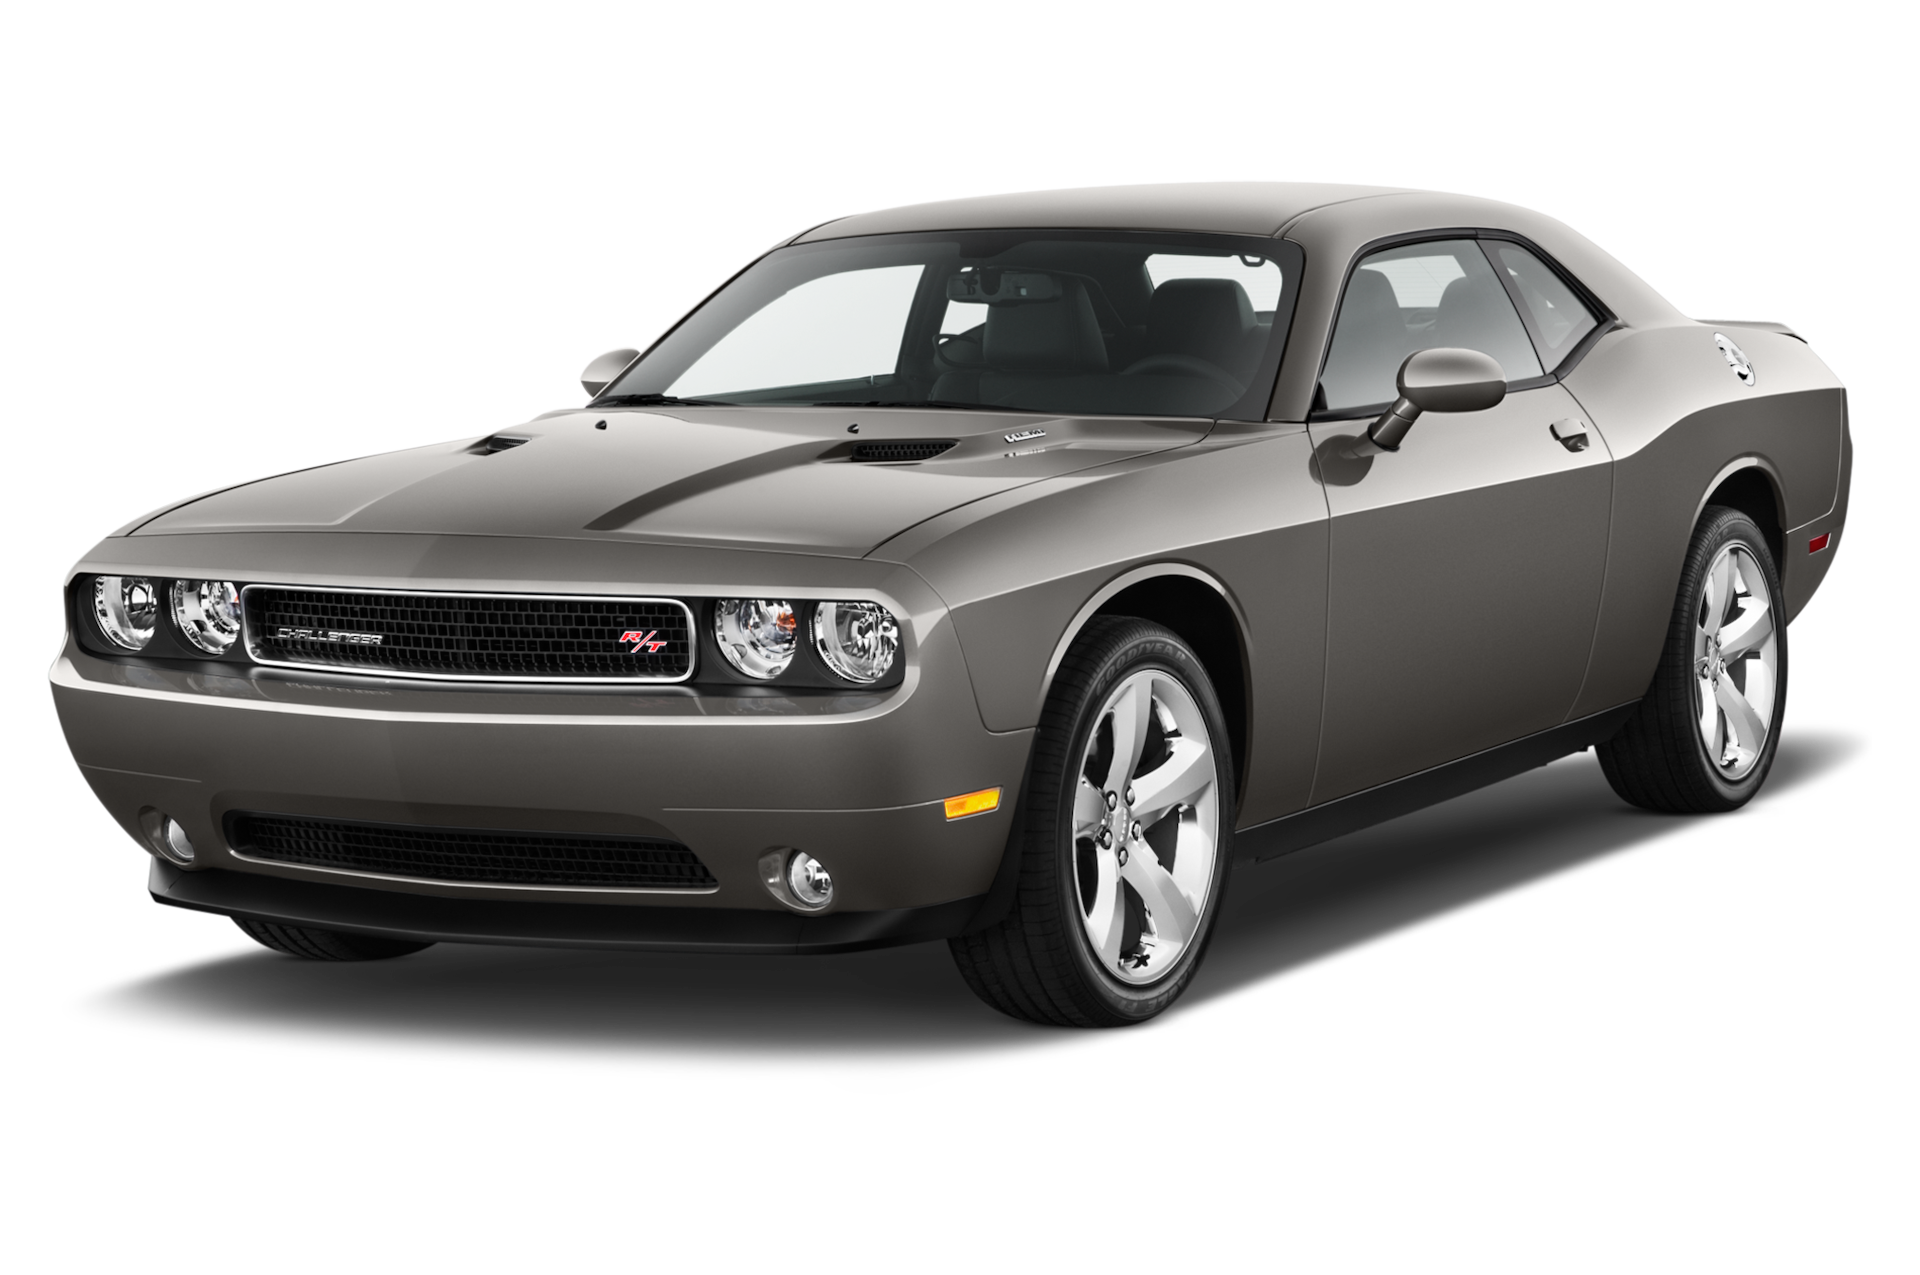 2012 Dodge Challenger Prices, Reviews, and Photos - MotorTrend